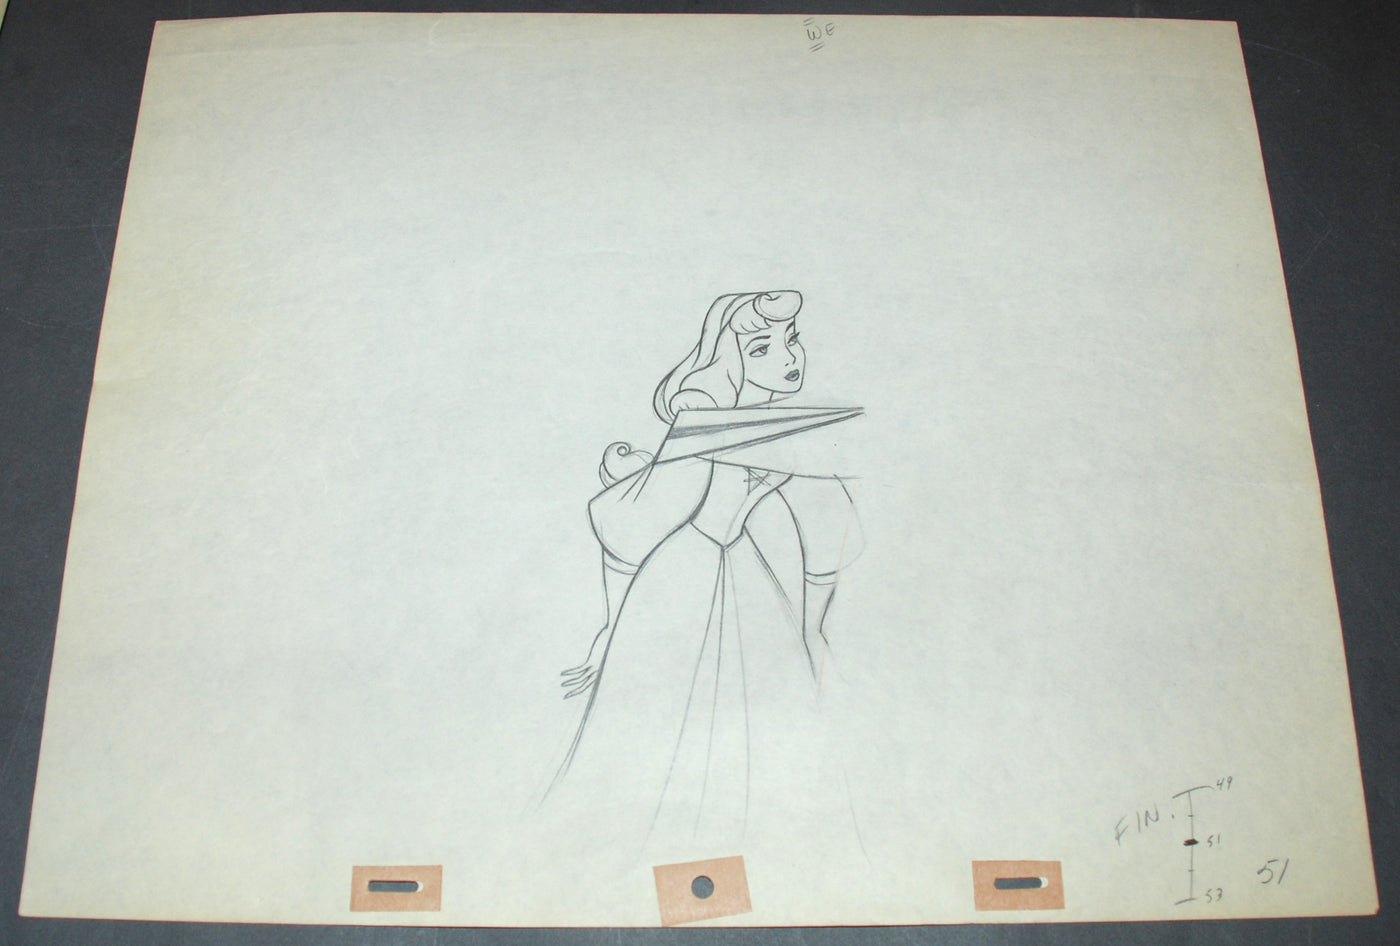 Original Walt Disney Production Drawing from Sleeping Beauty featuring Briar Rose